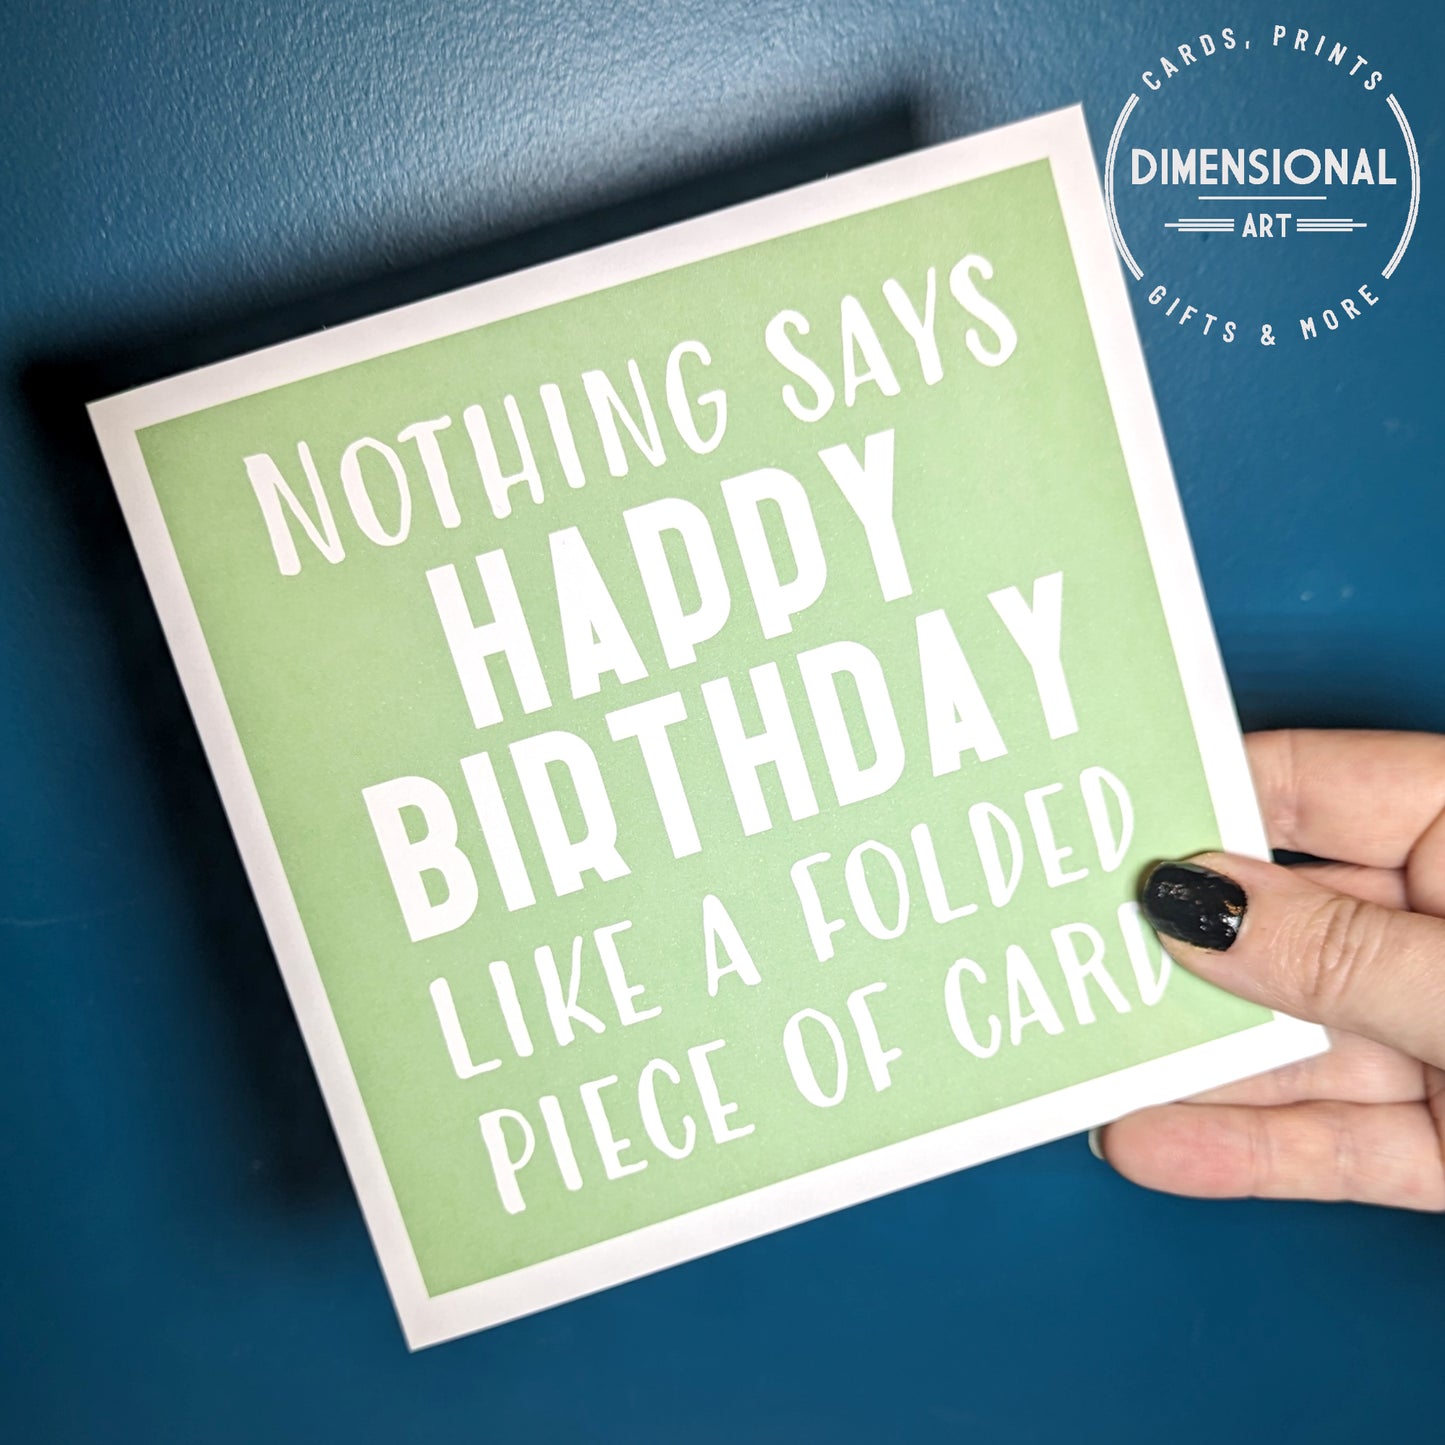 Nothing says happy birthday like a folded piece of card - Birthday Card